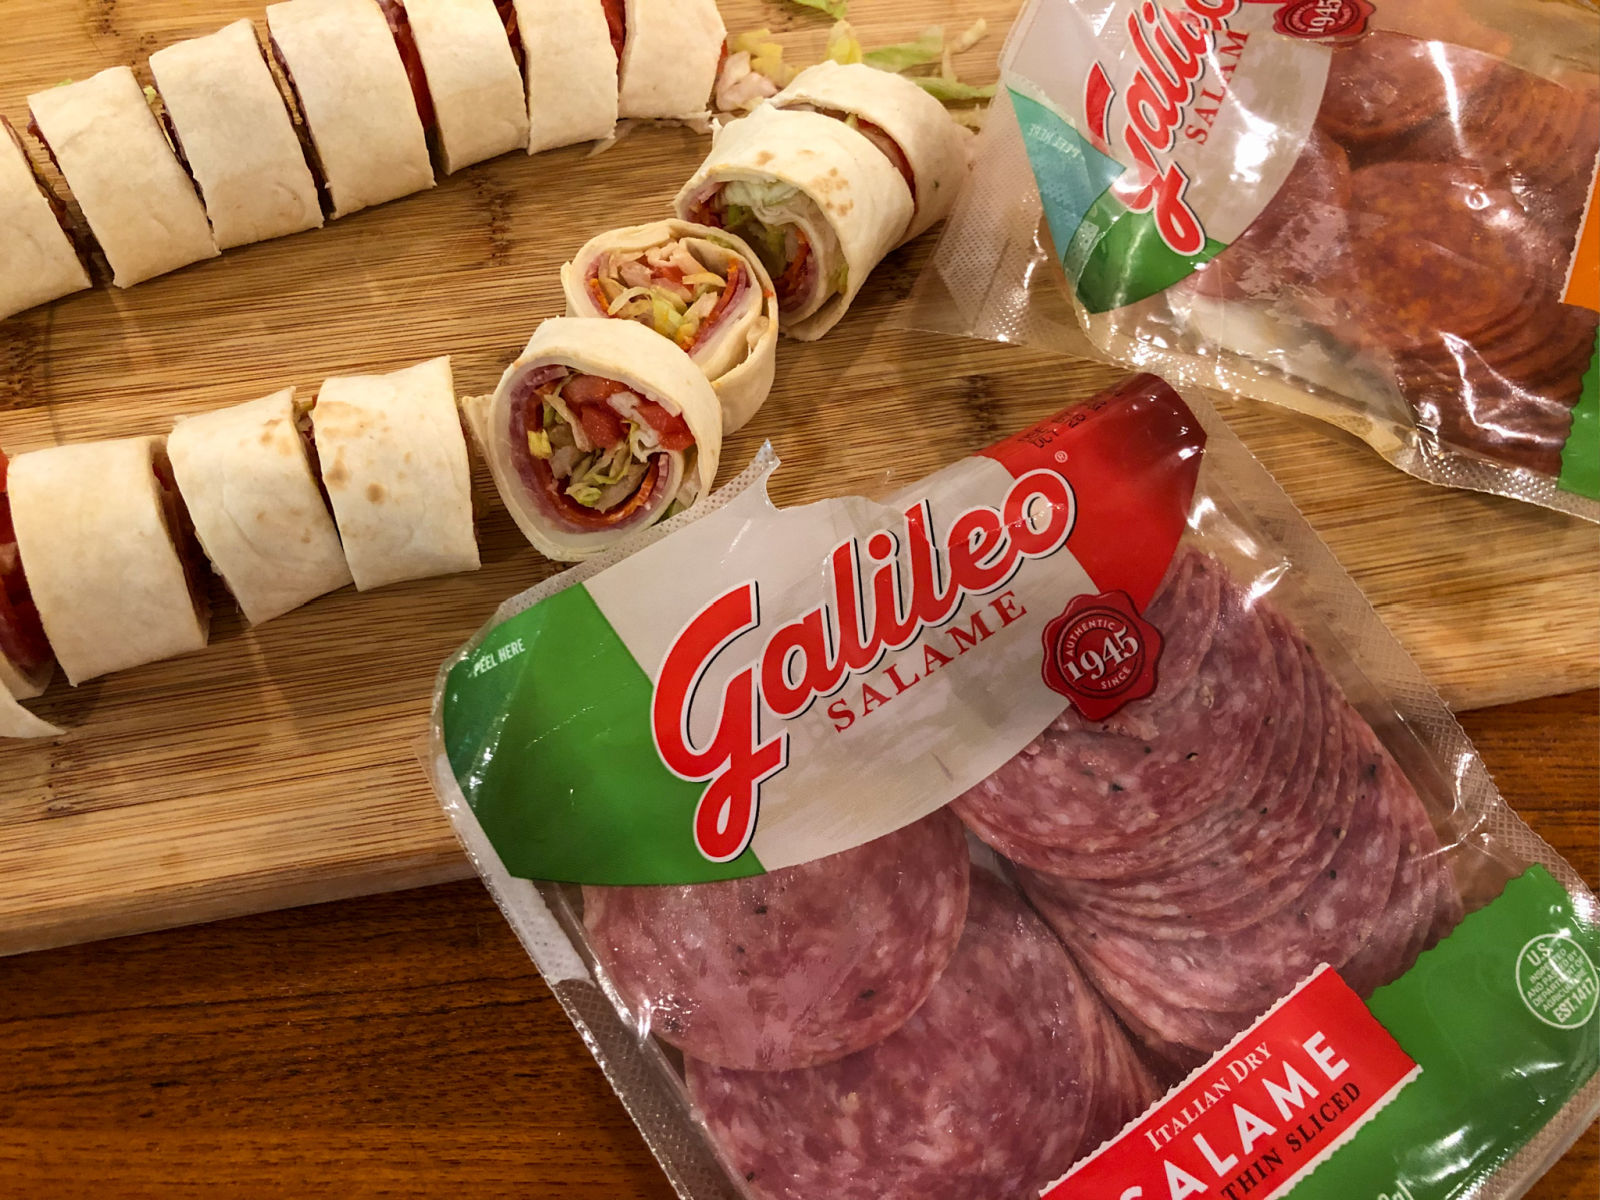 Enjoy Authentic Italian Taste When You Choose Galileo® Salame & Pepperoni - Save Now At Publix! on I Heart Publix 2